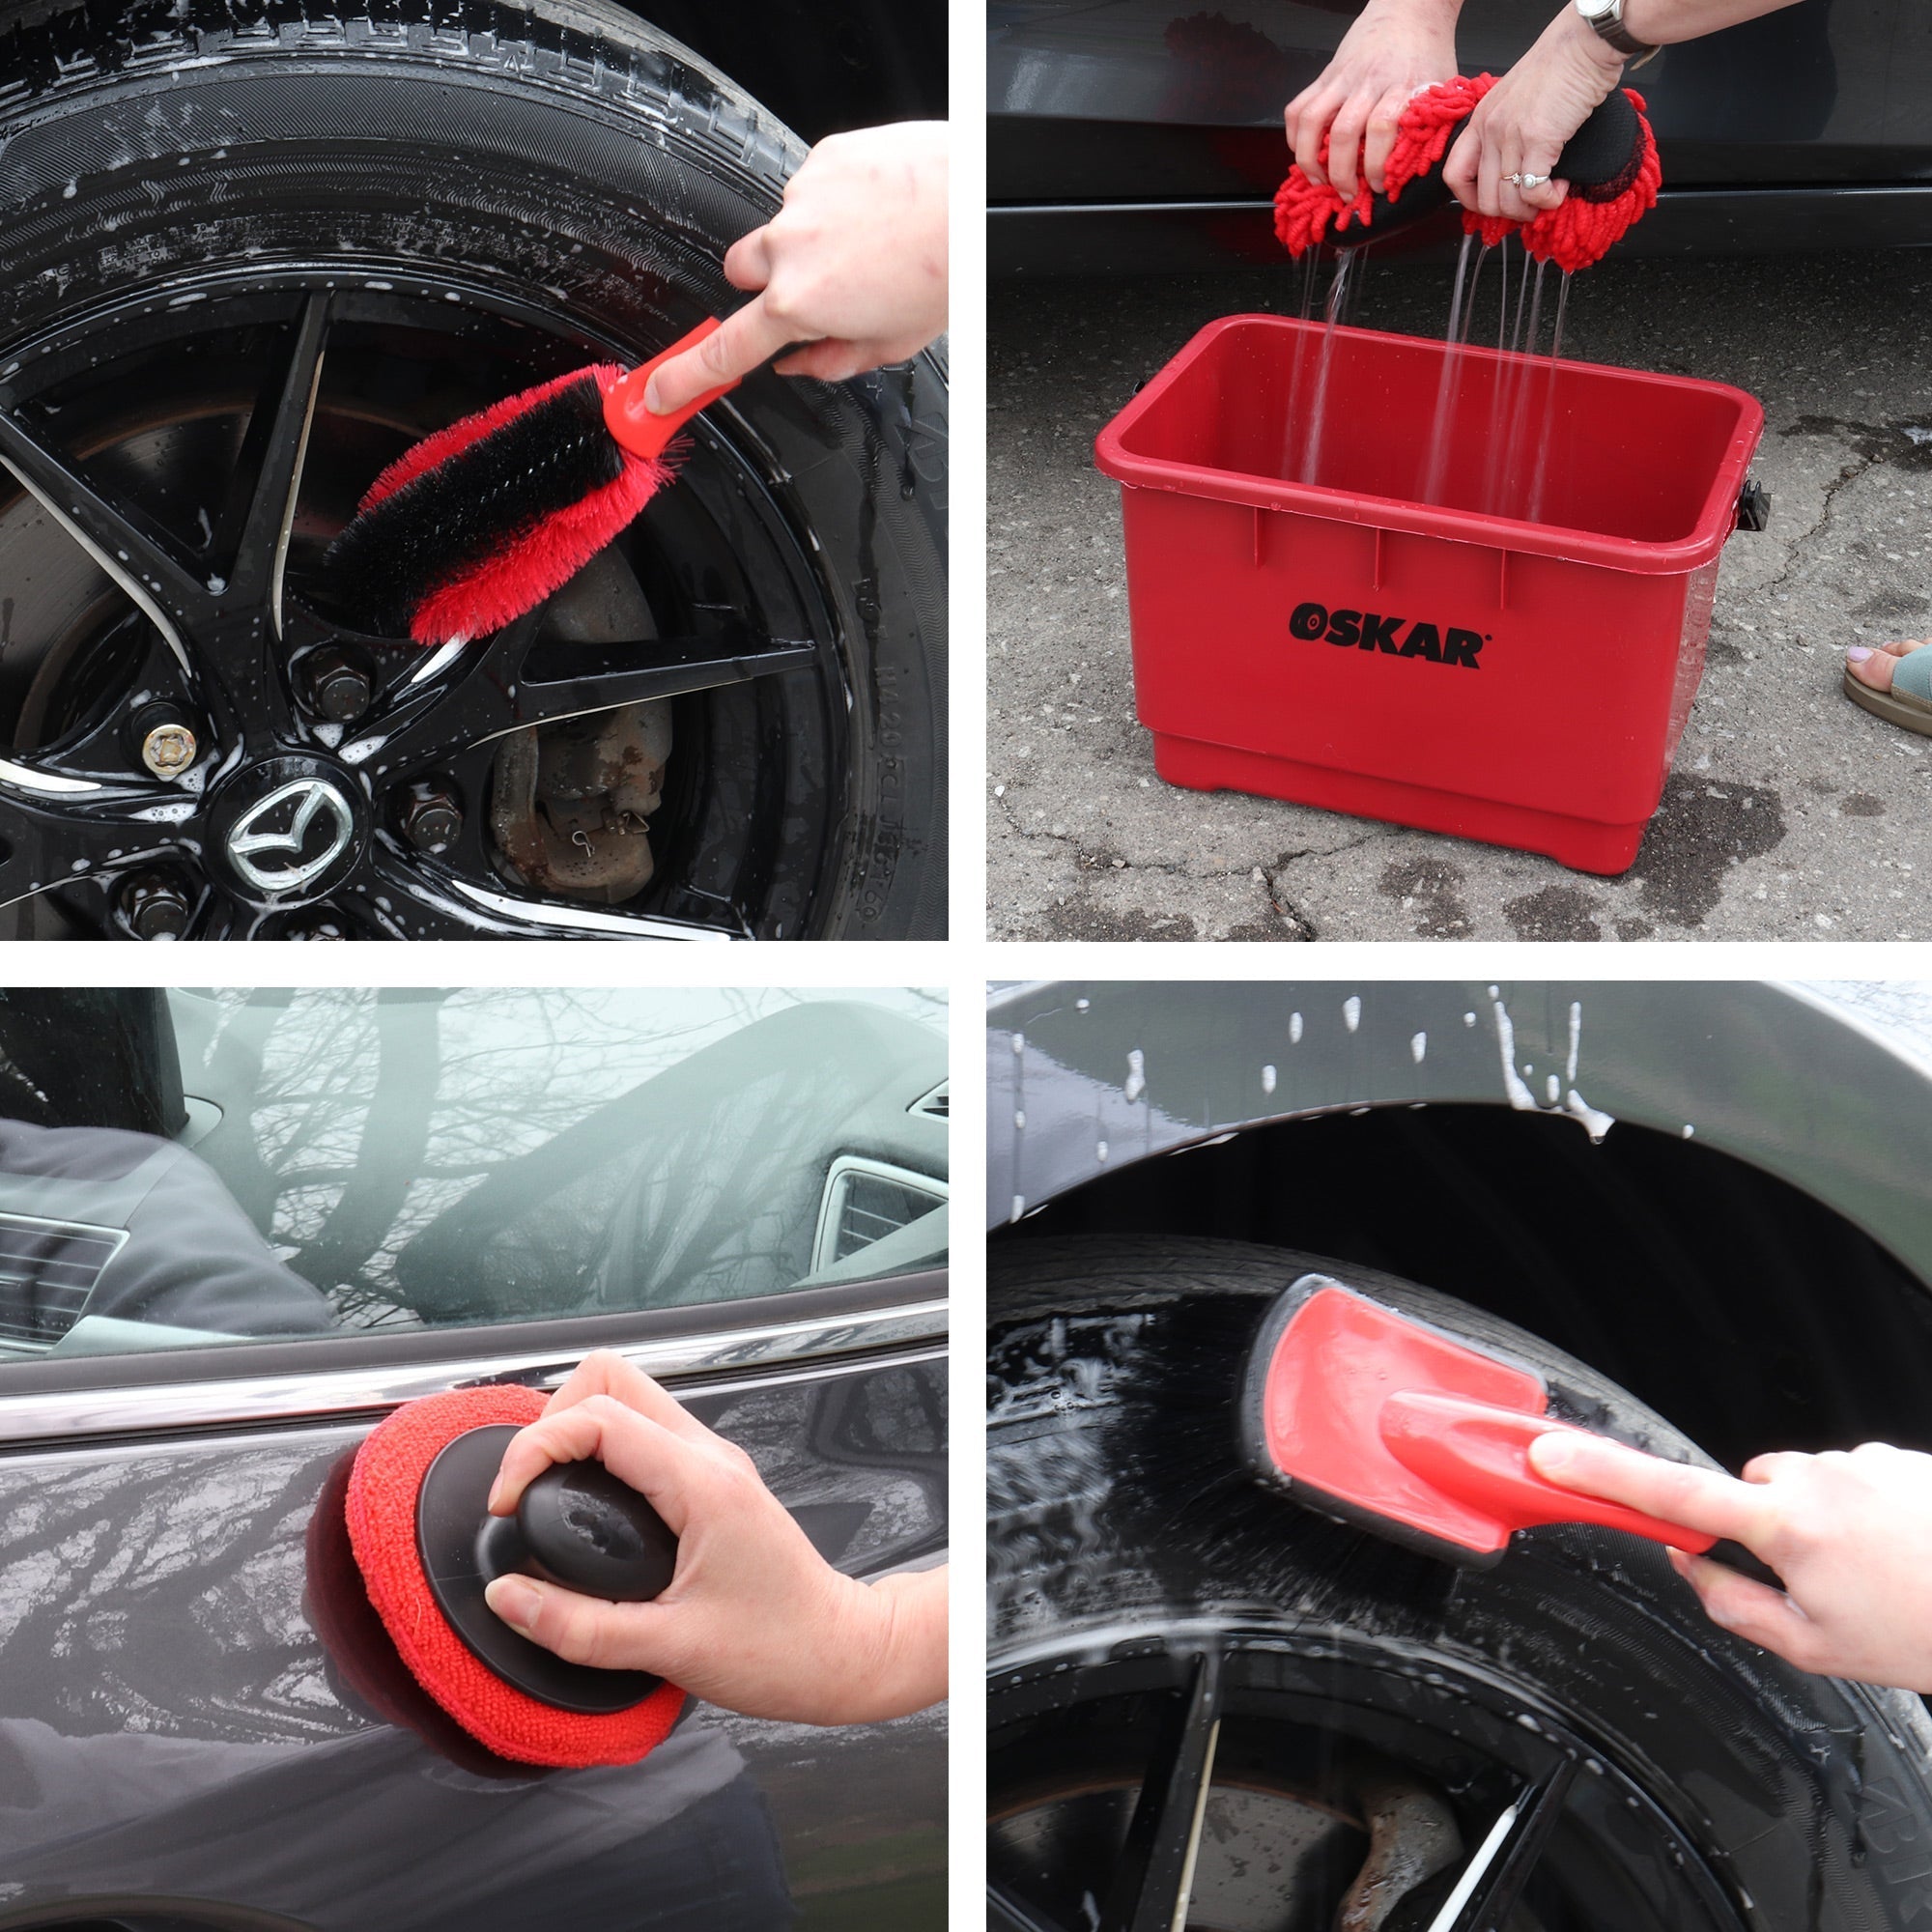 Grid of four lifestyle images of ultimate car wash kit being used to wash a dark gray car: First shows the mag wheel brush being used to wash clean a tire rim; second shows two hands wringing out wash and scrub sponge over the bucket; third shows the tire brush being used to wash scrub a tire; fourth shows the product applicator pad with handle attached being rubbed on the car door